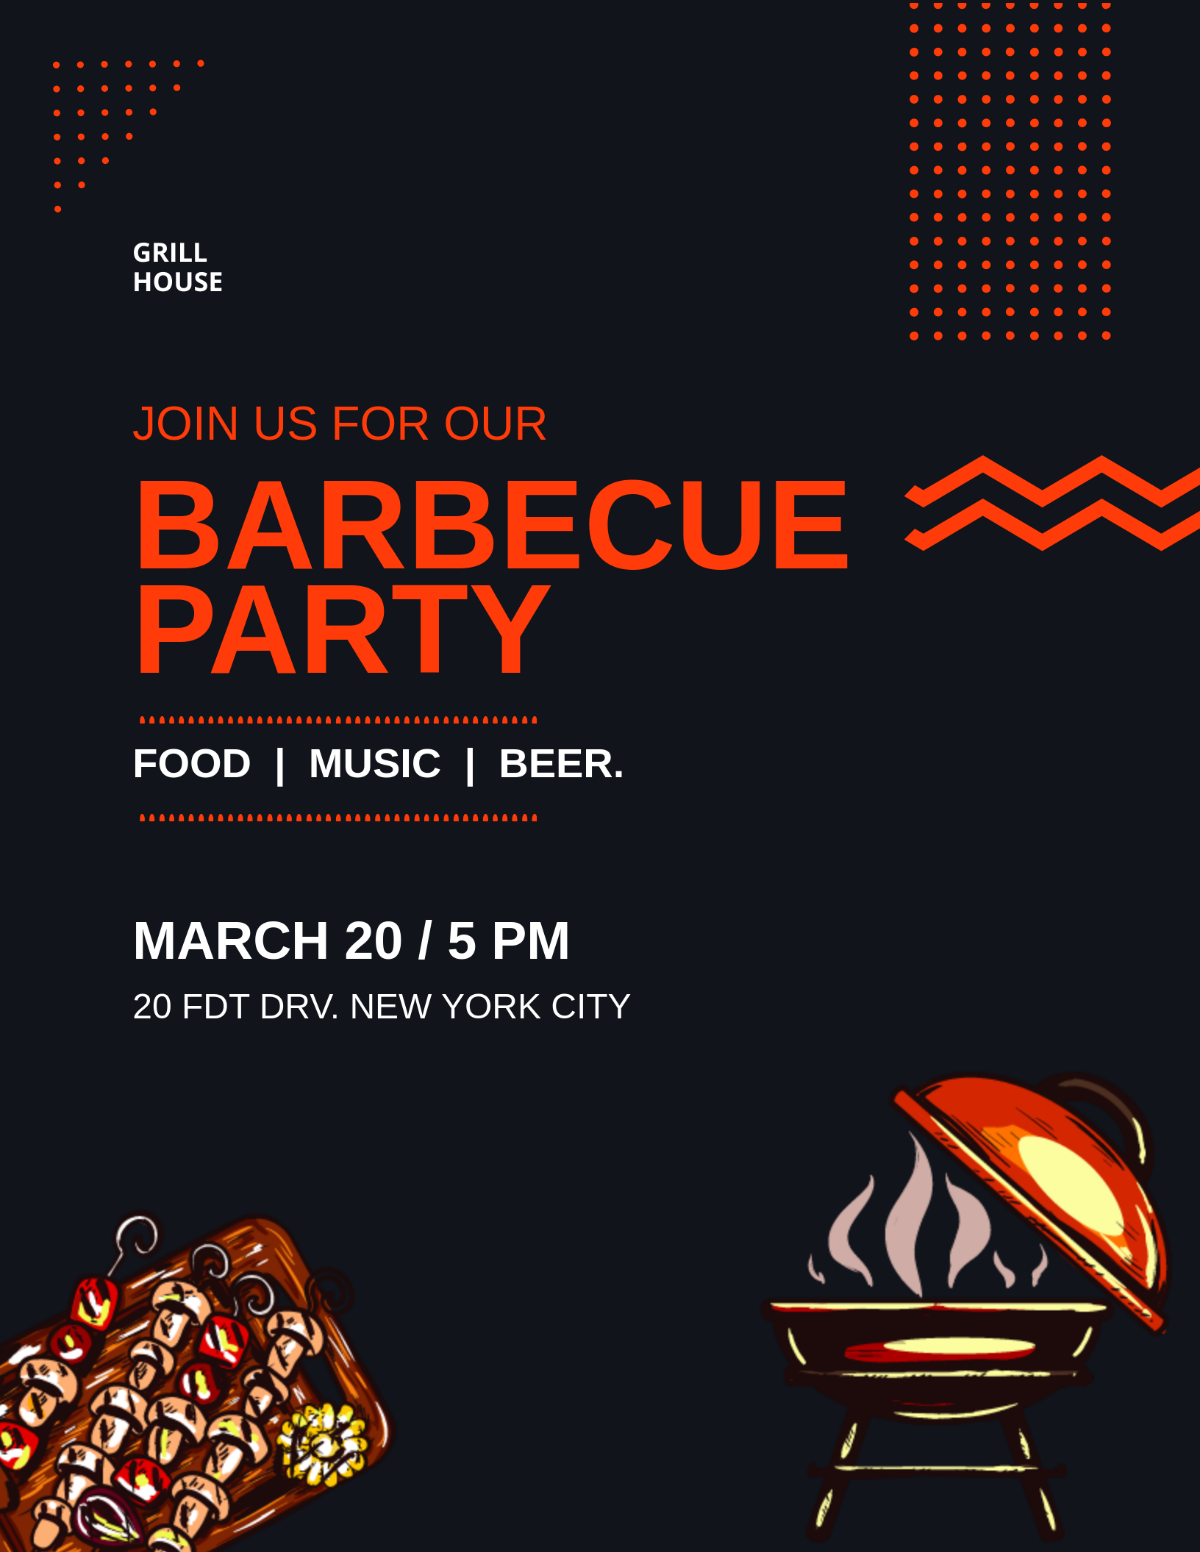 Barbecue Grill Restaurant Flyer Template